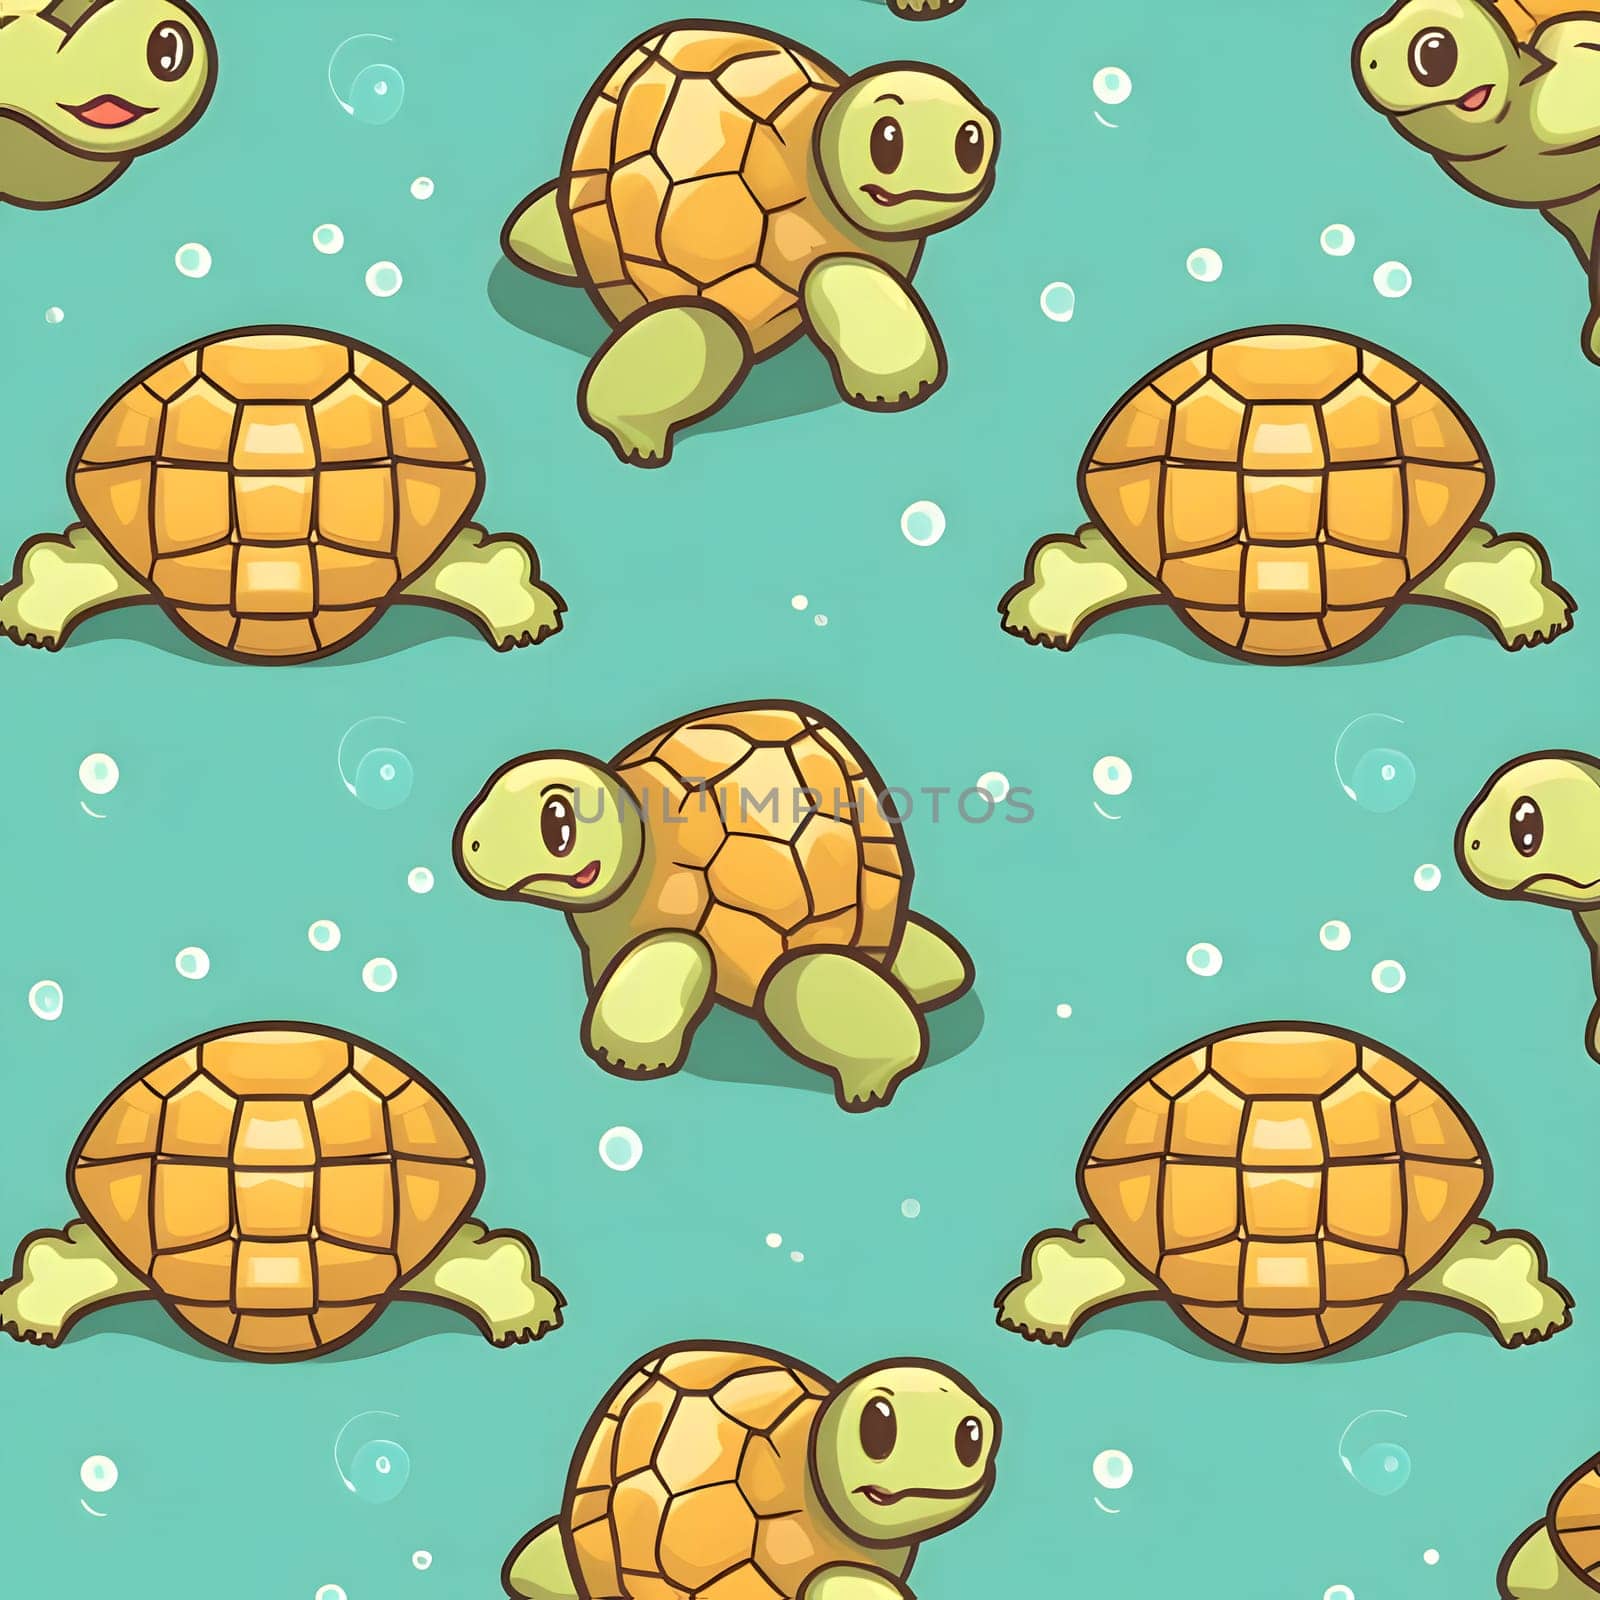 Patterns and banners backgrounds: Seamless pattern with cute cartoon turtle on turquoise background